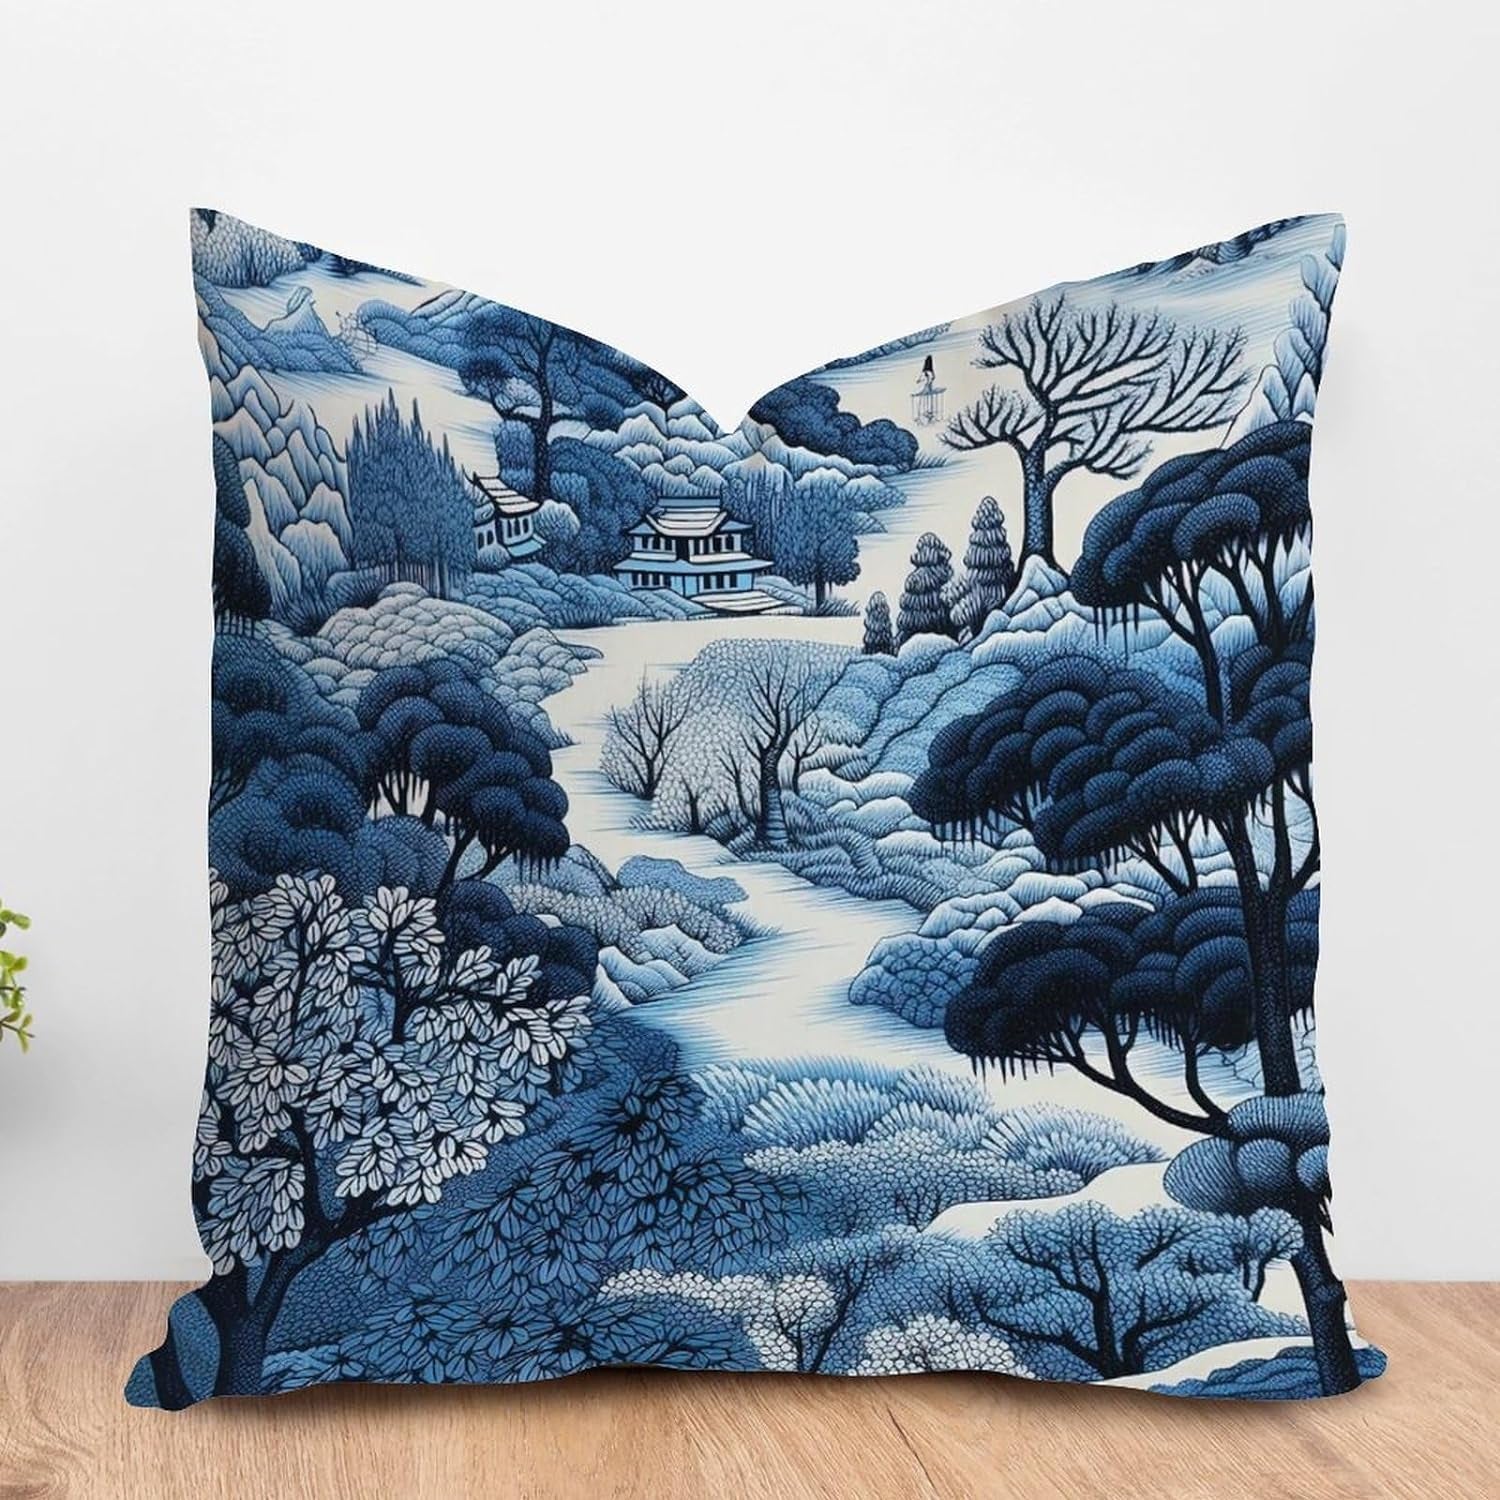 Aroggeld Antique Chinoiserie Asian Cushion Cover Farmer Men Working Pillow Cover Home Decorative Double Side Pillow Farmhouse Toss Daily Family Accent Pillow for Sofa Couch Bedroom 18Inch Linen